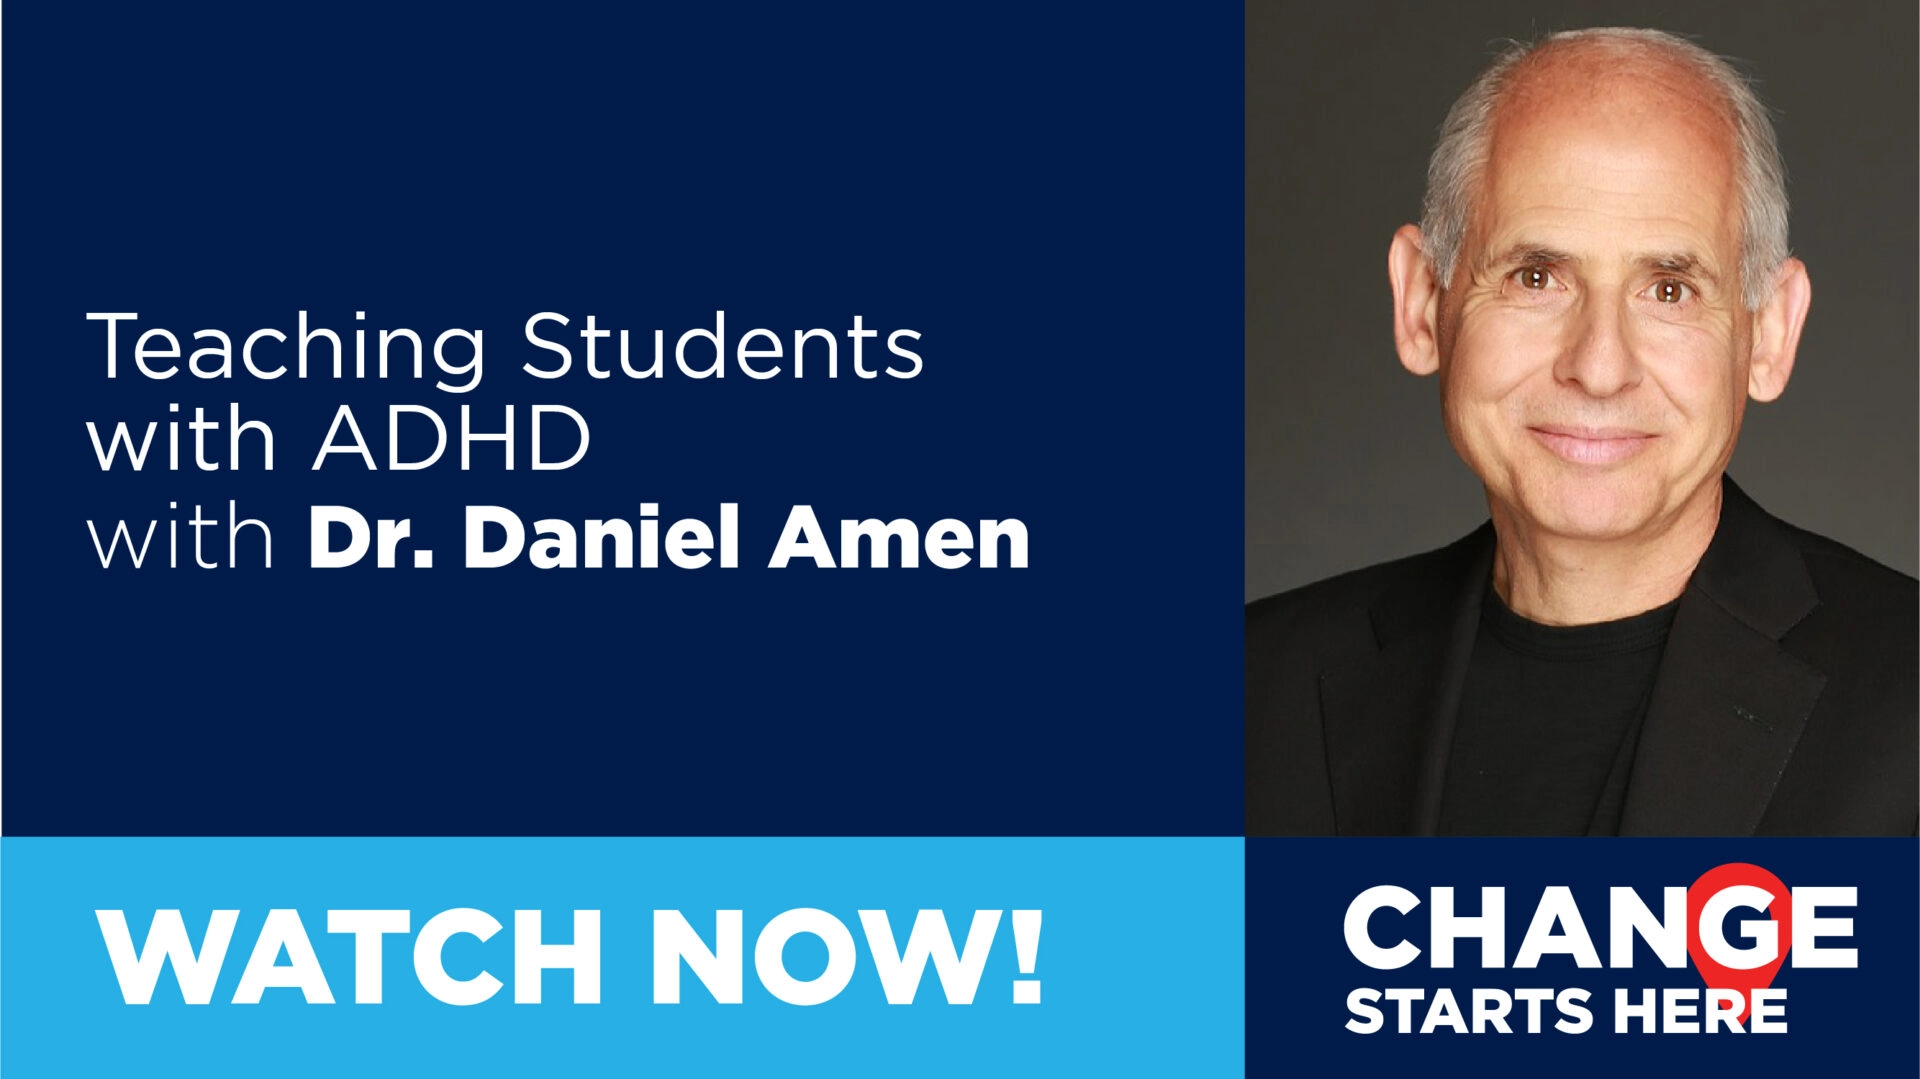 Dr. Daniel Amen - Getting well is not just about becoming